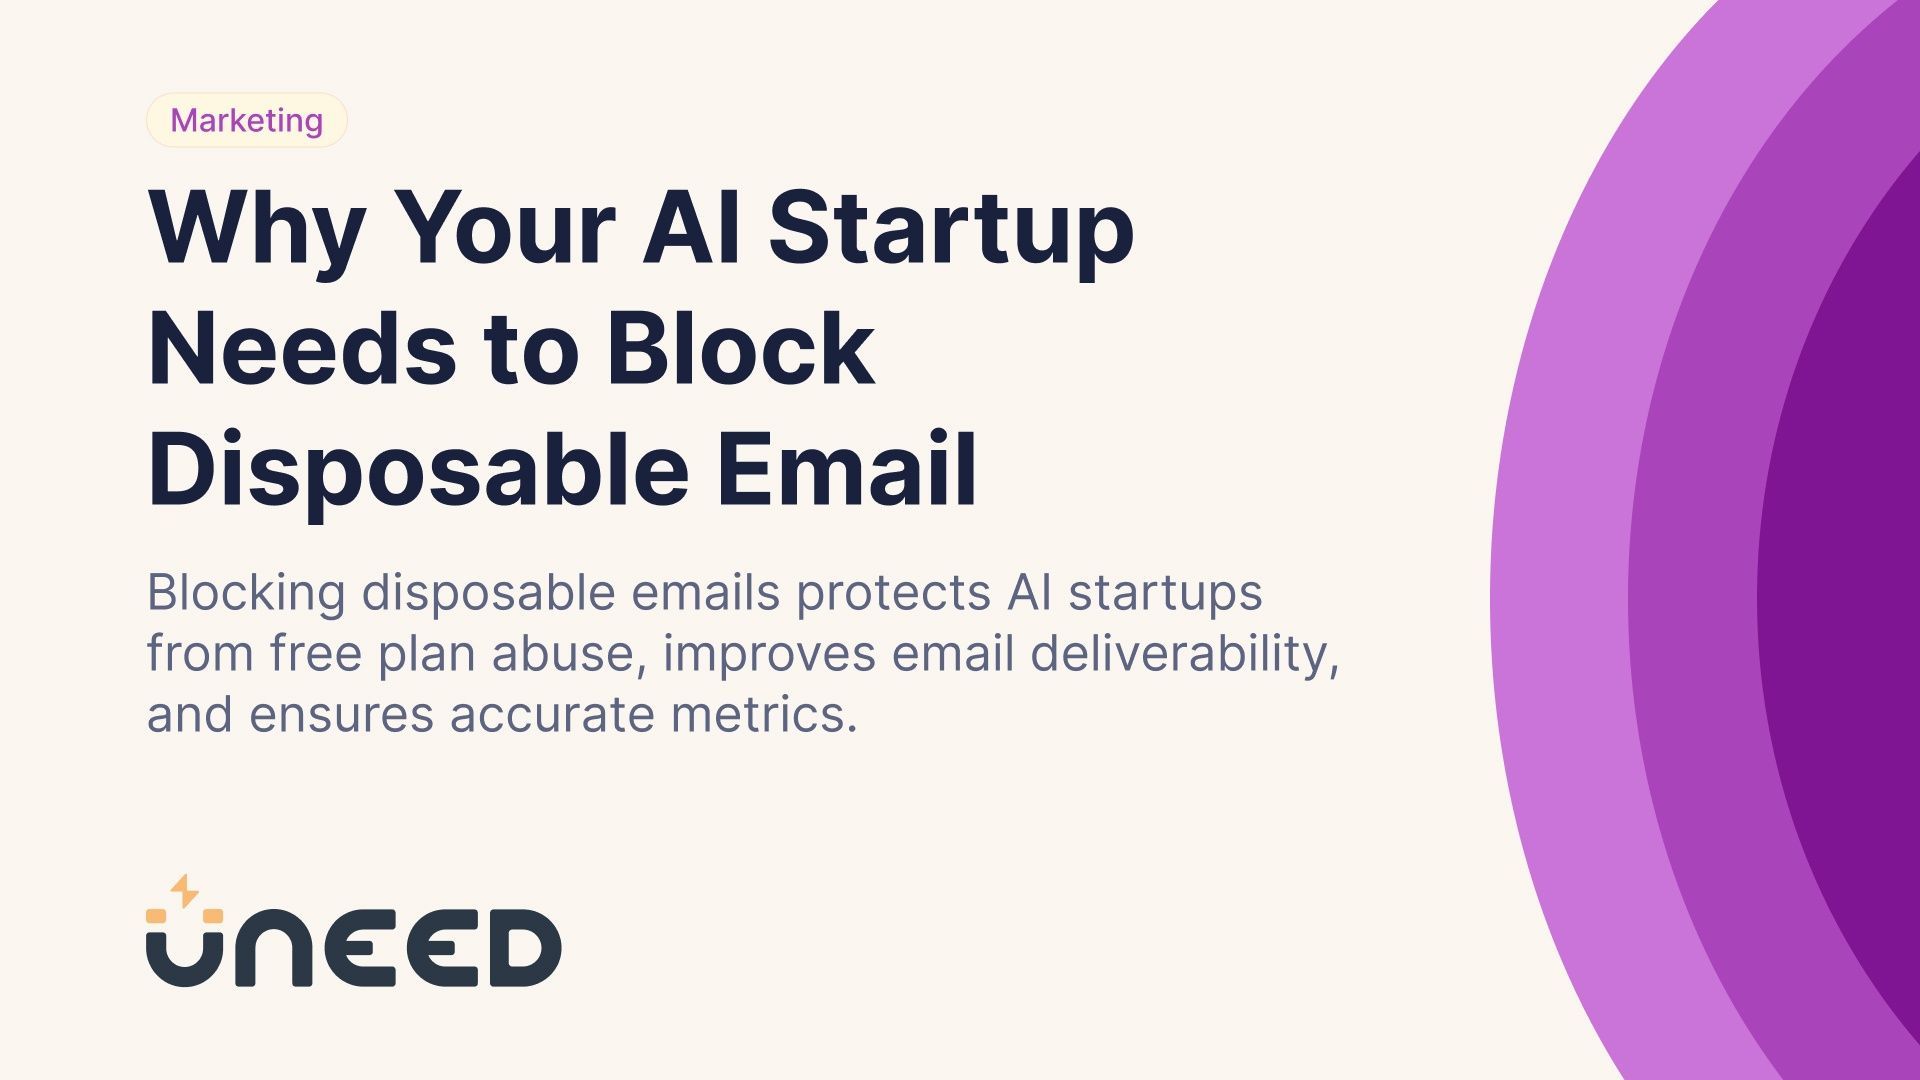 Why Your AI Startup Needs to Block Disposable Email